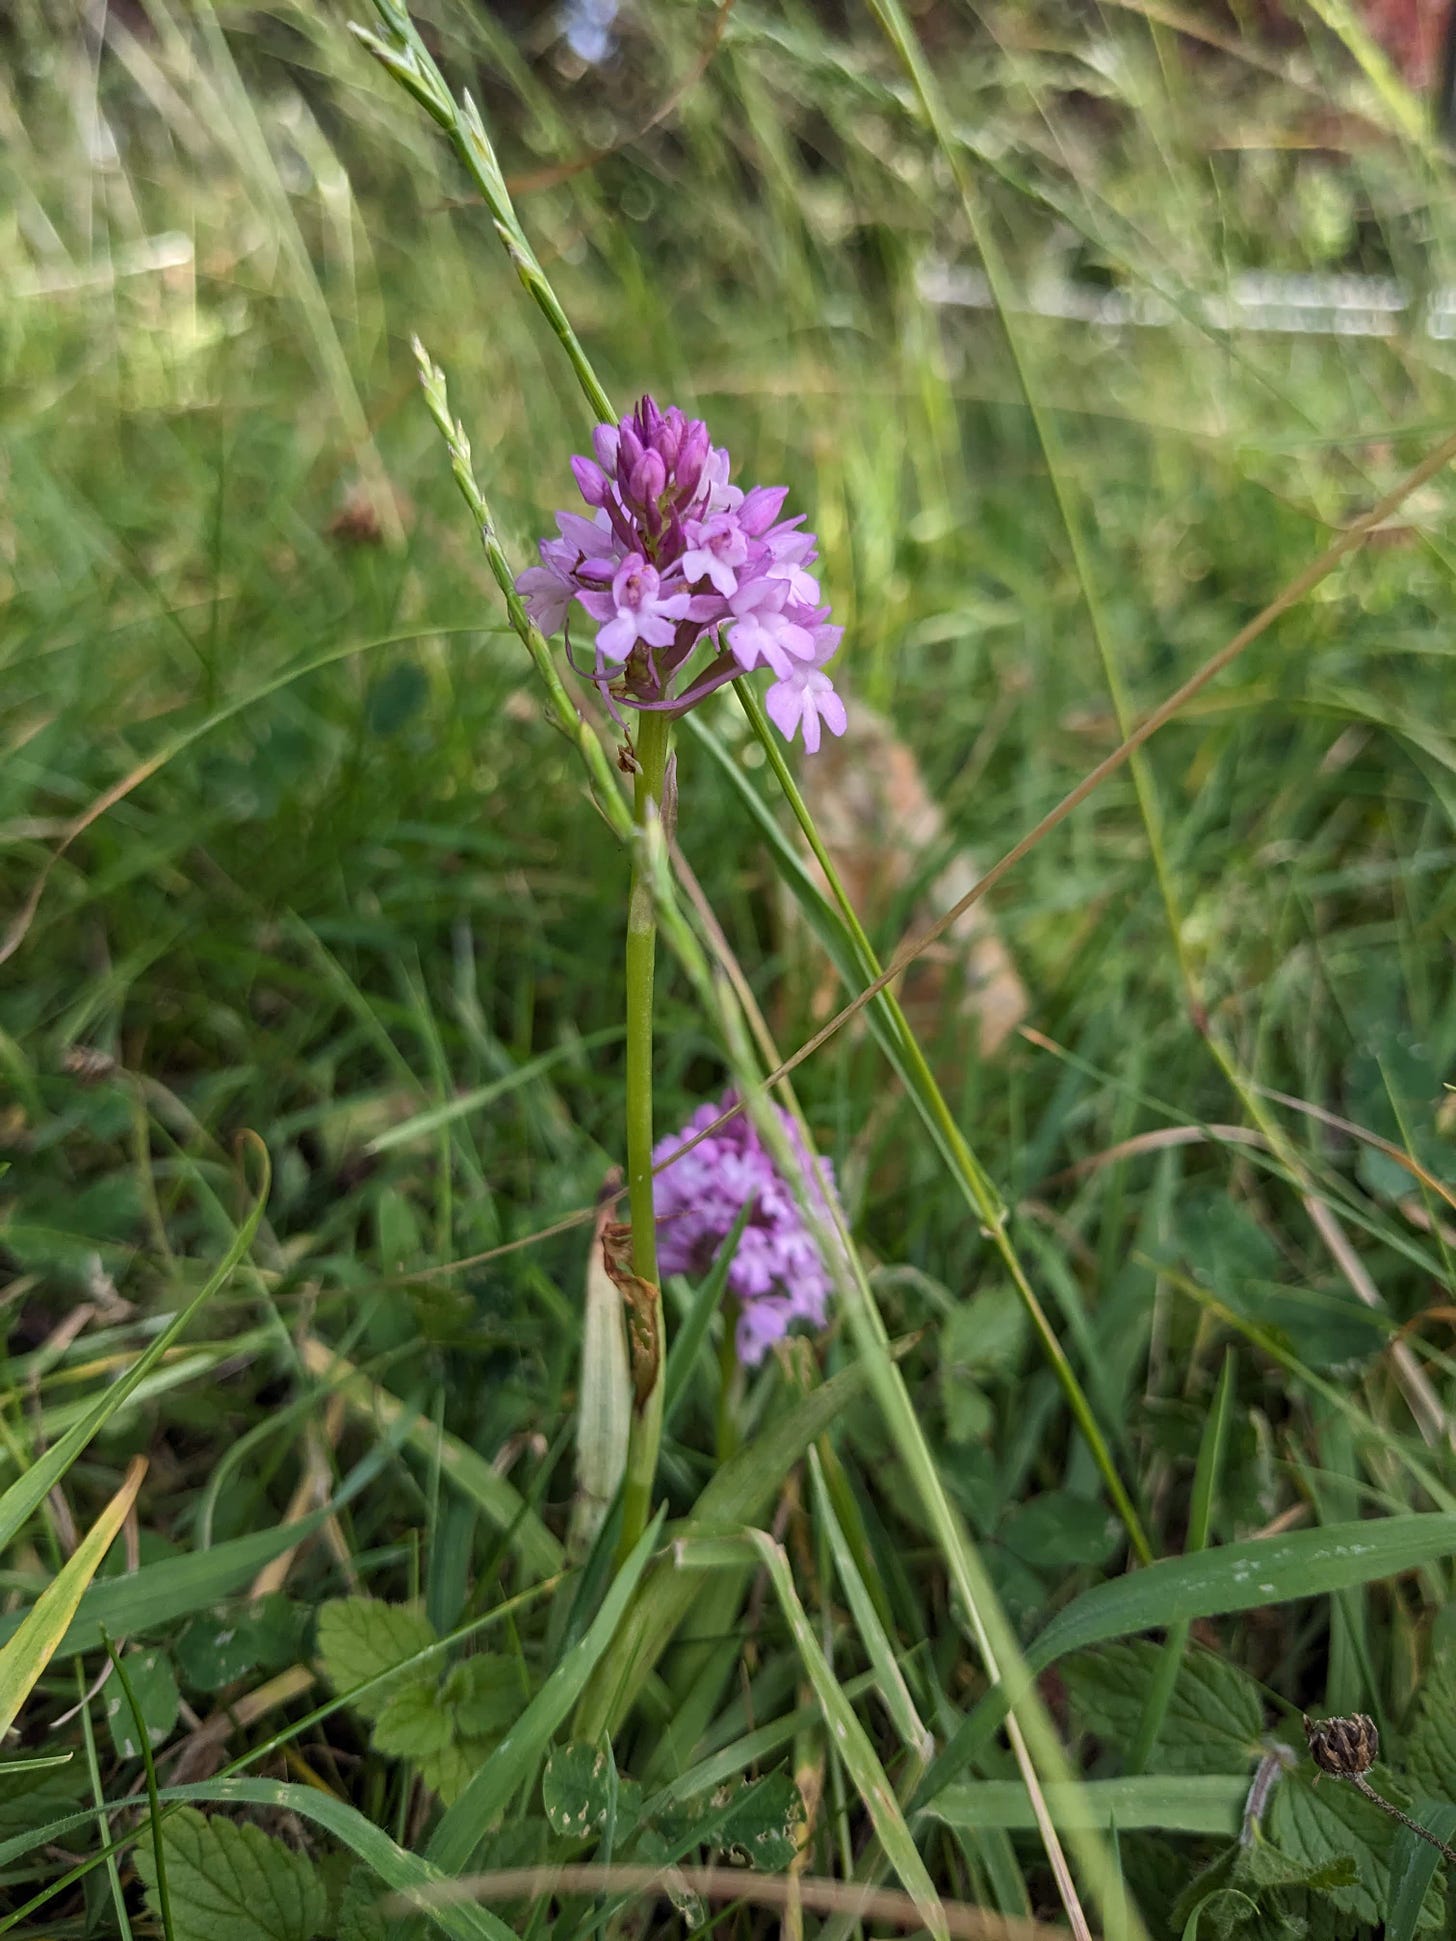 a pyramidal orchid and grasses. the orchid is pale magenta